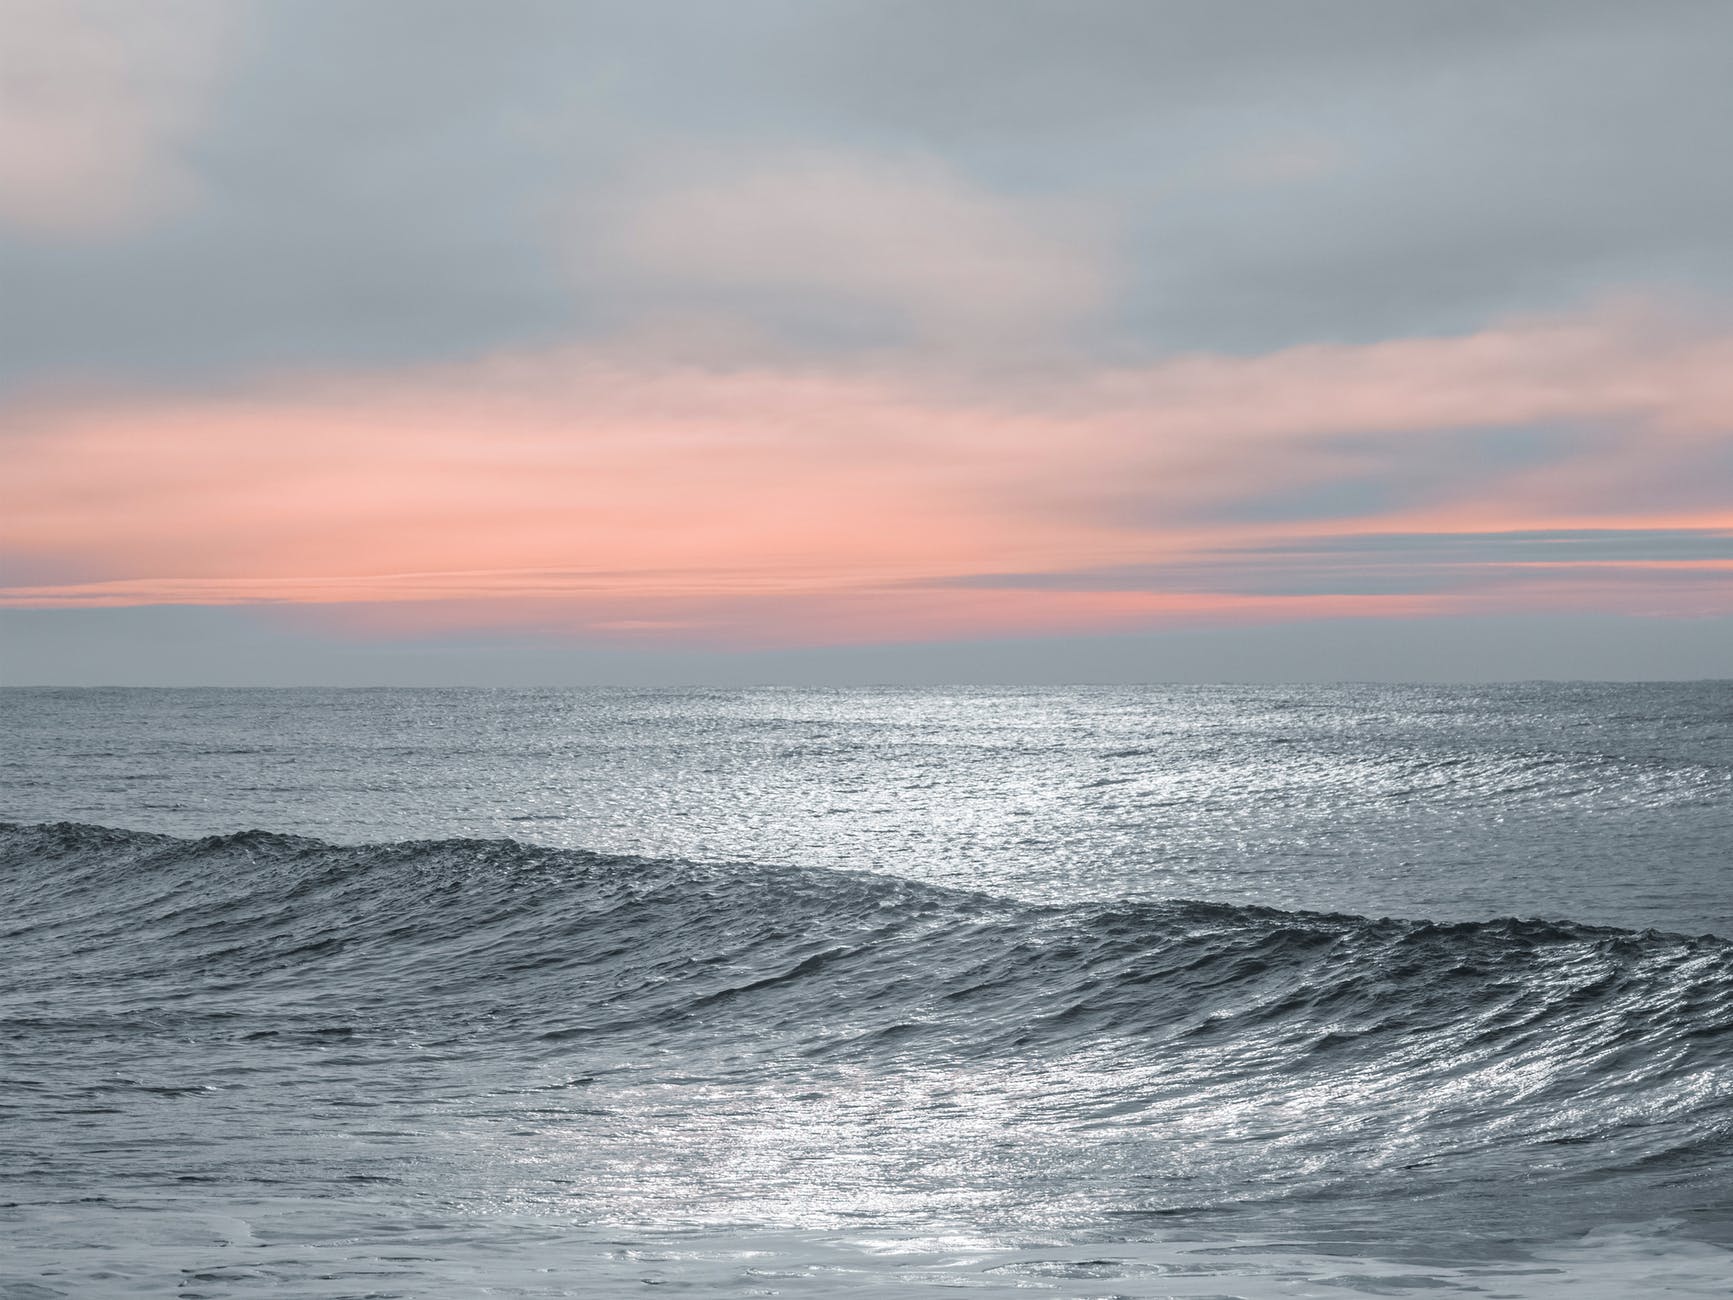 ocean waves under cloudy sky during sunset